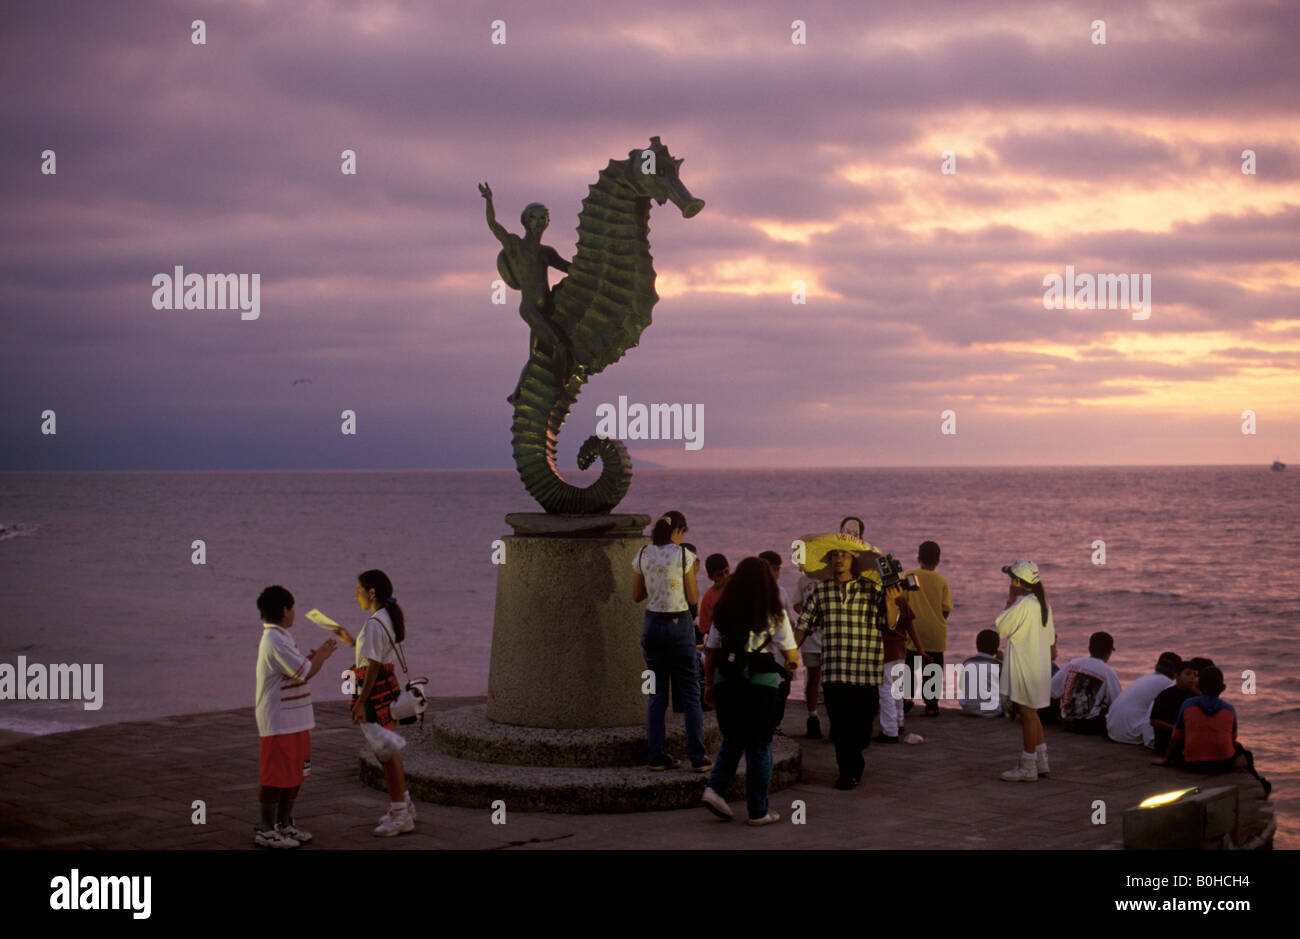 Tourists enjoying the sunset view beneath a statue of a person riding a seahorse on the beach promenade in Puerto Vallarta, Jal Stock Photo